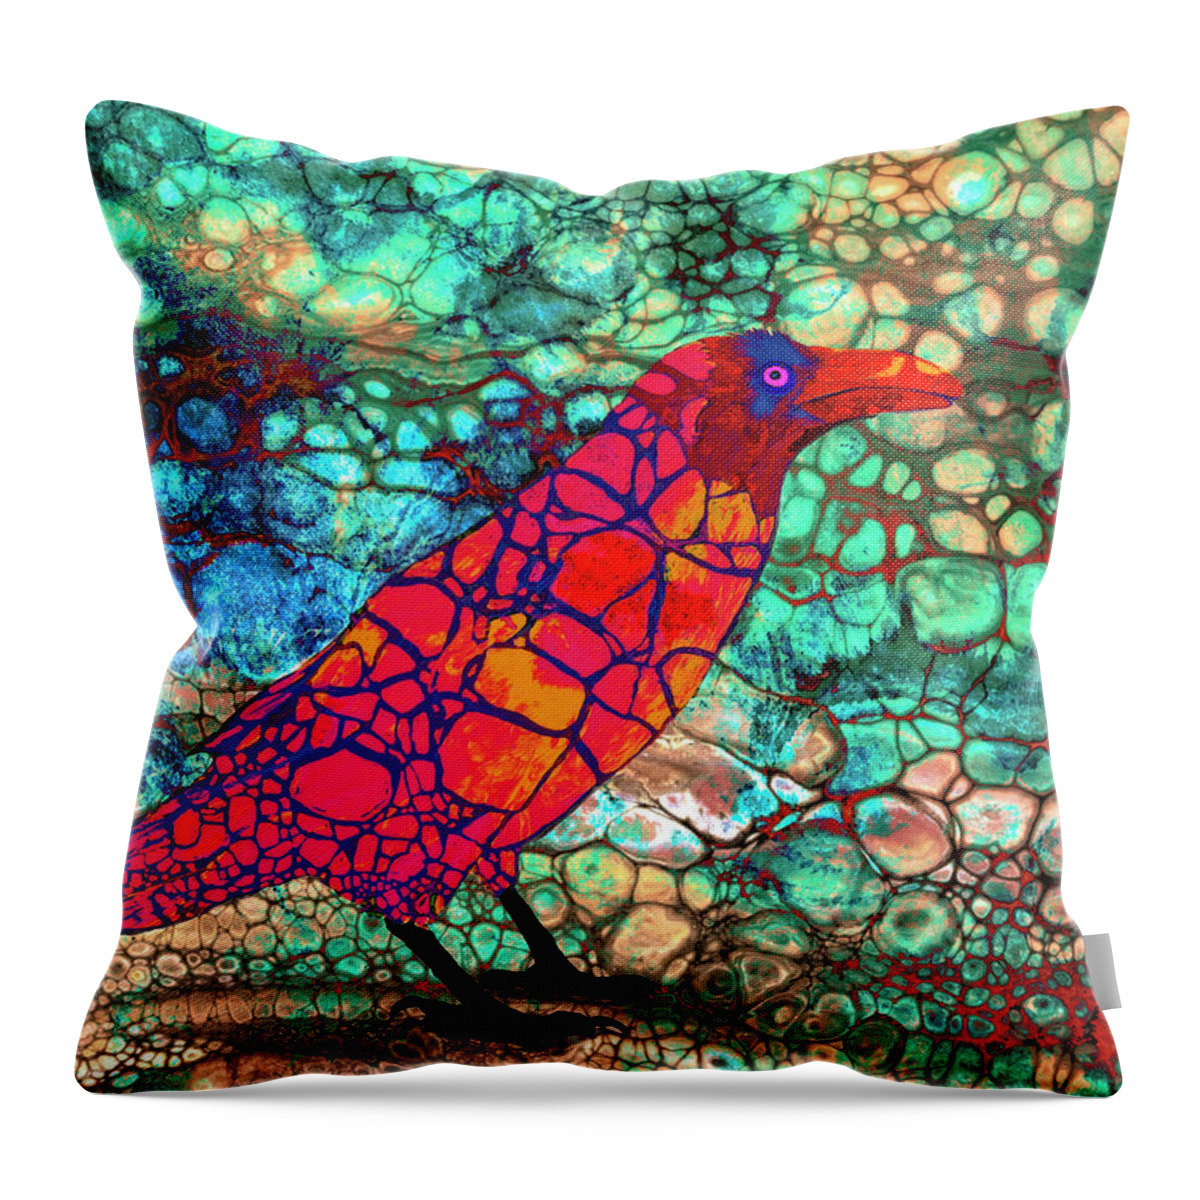 Bird Throw Pillow featuring the digital art Red Raven by Sandra Selle Rodriguez